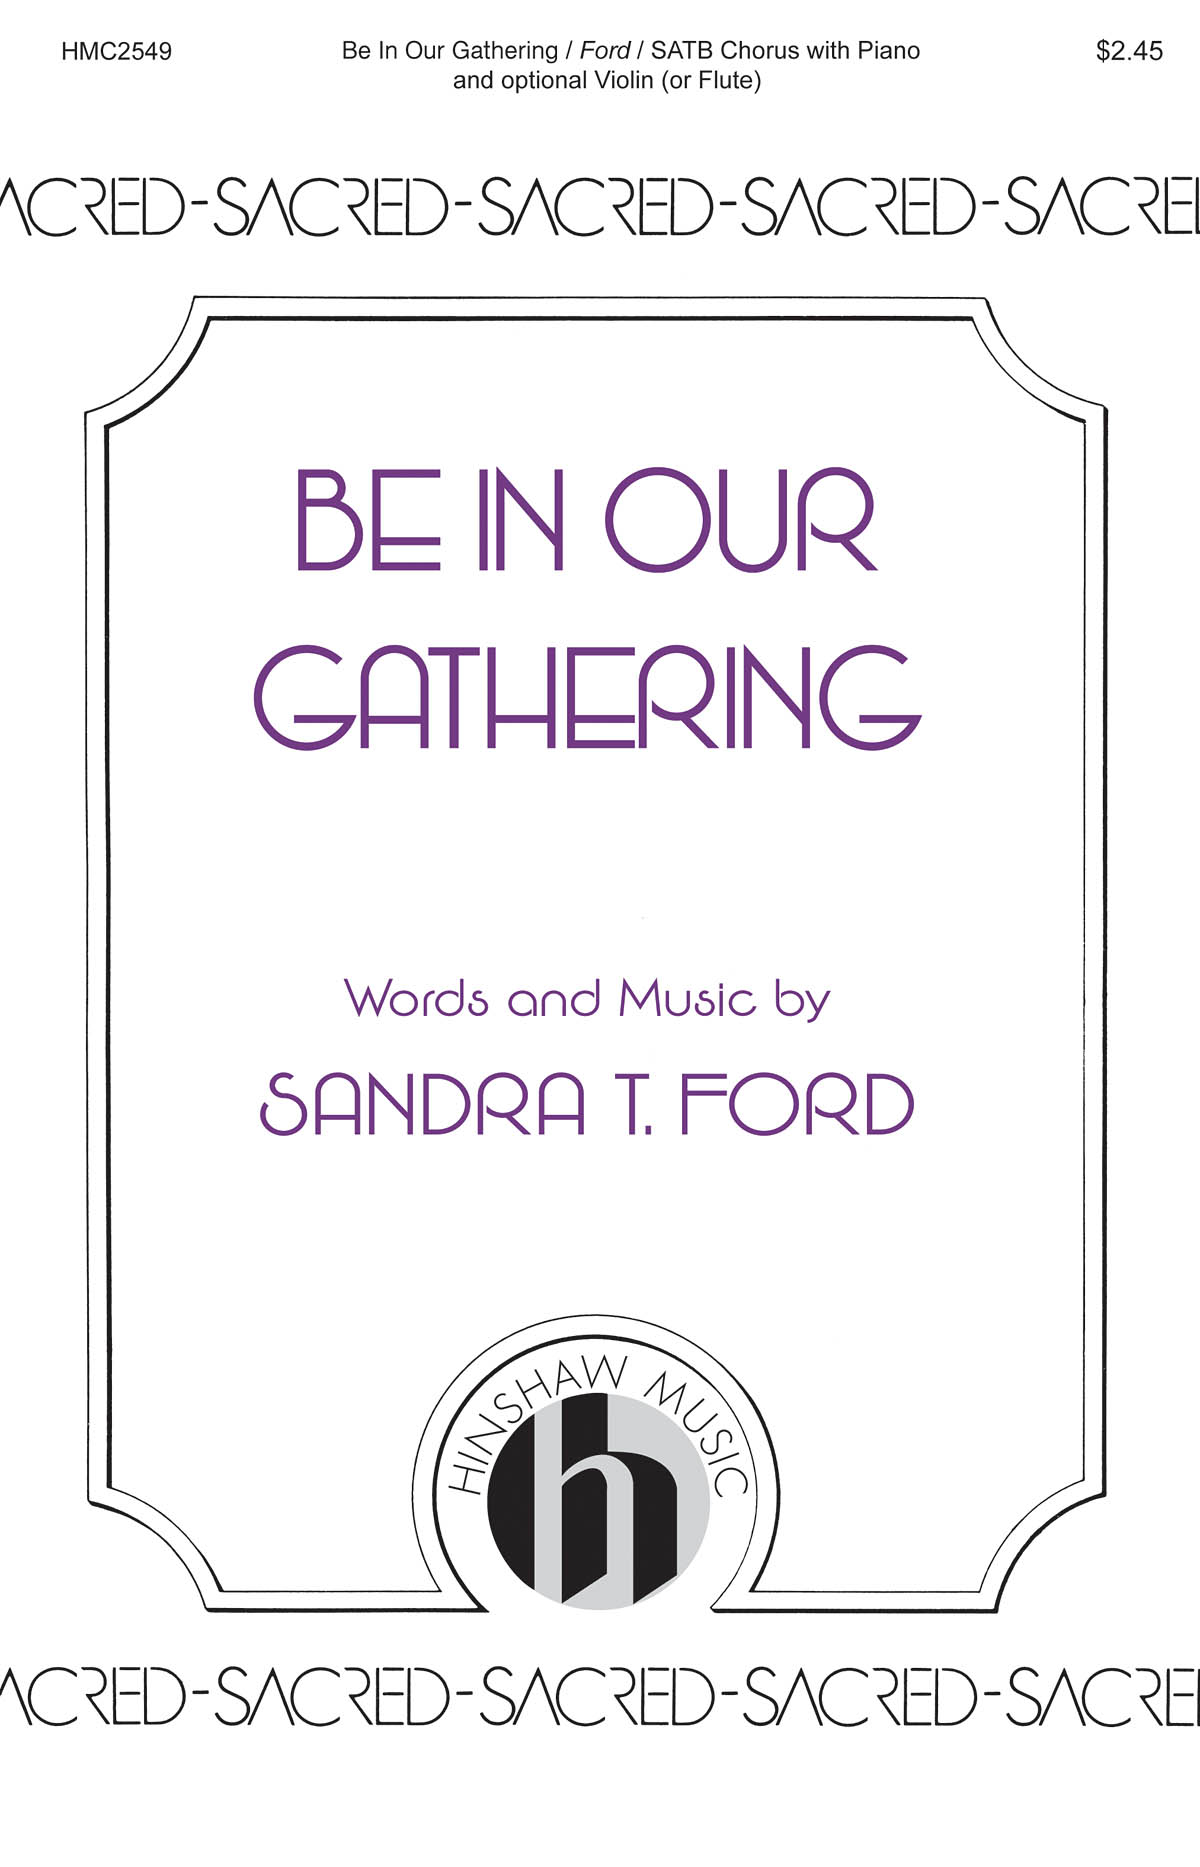 Sandra Ford: Be in Our Gatherings (SATB)